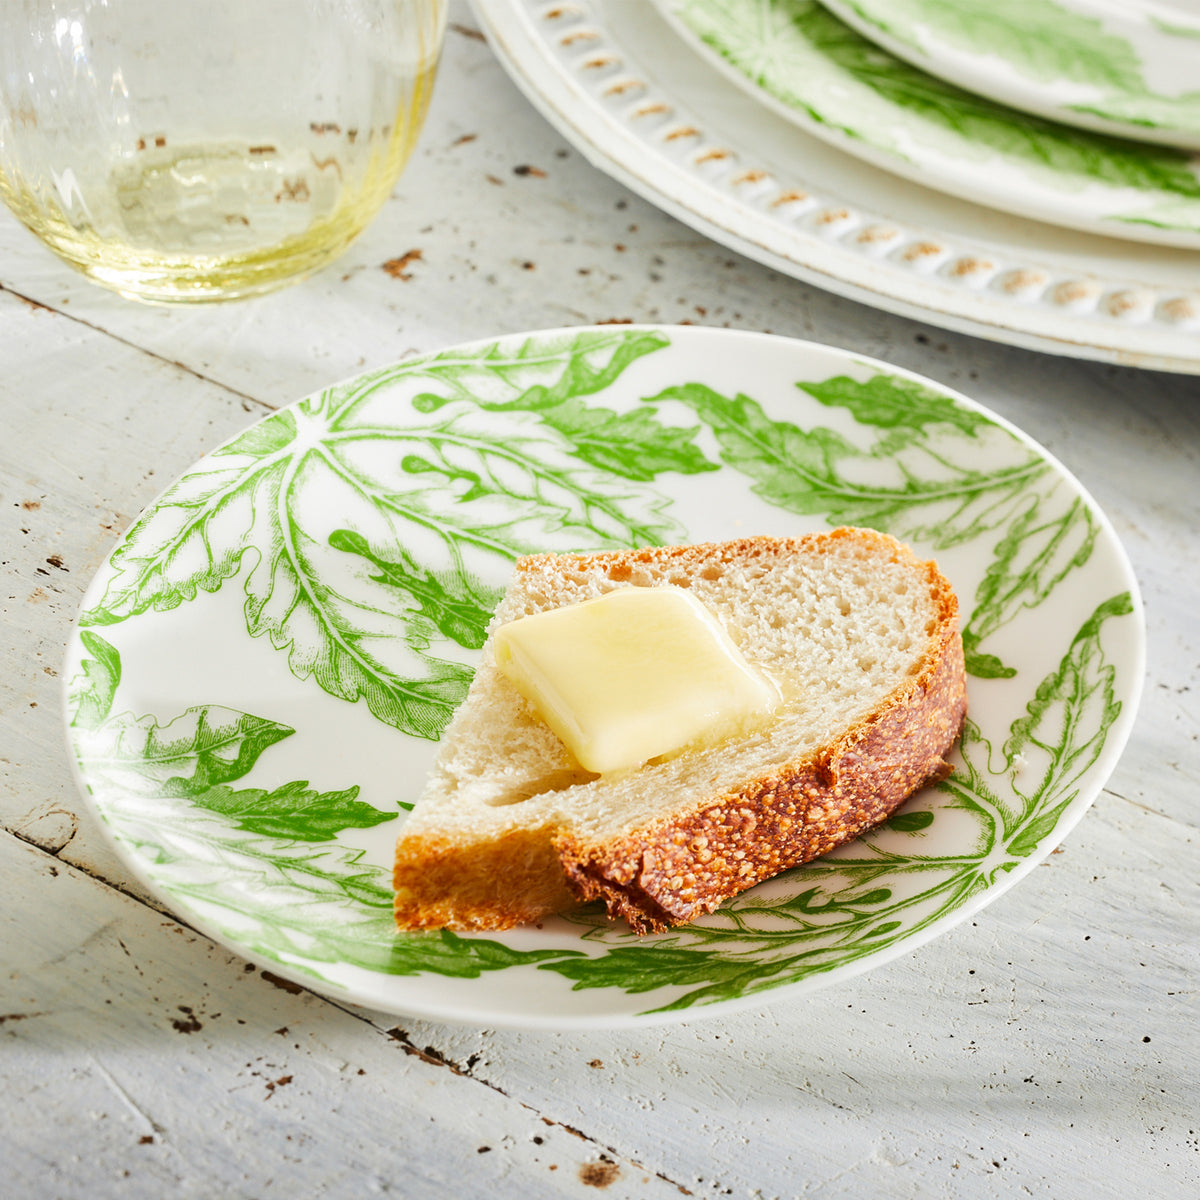 A slice of bread on a Freya canapé plate in green and white porcelain from Caskata